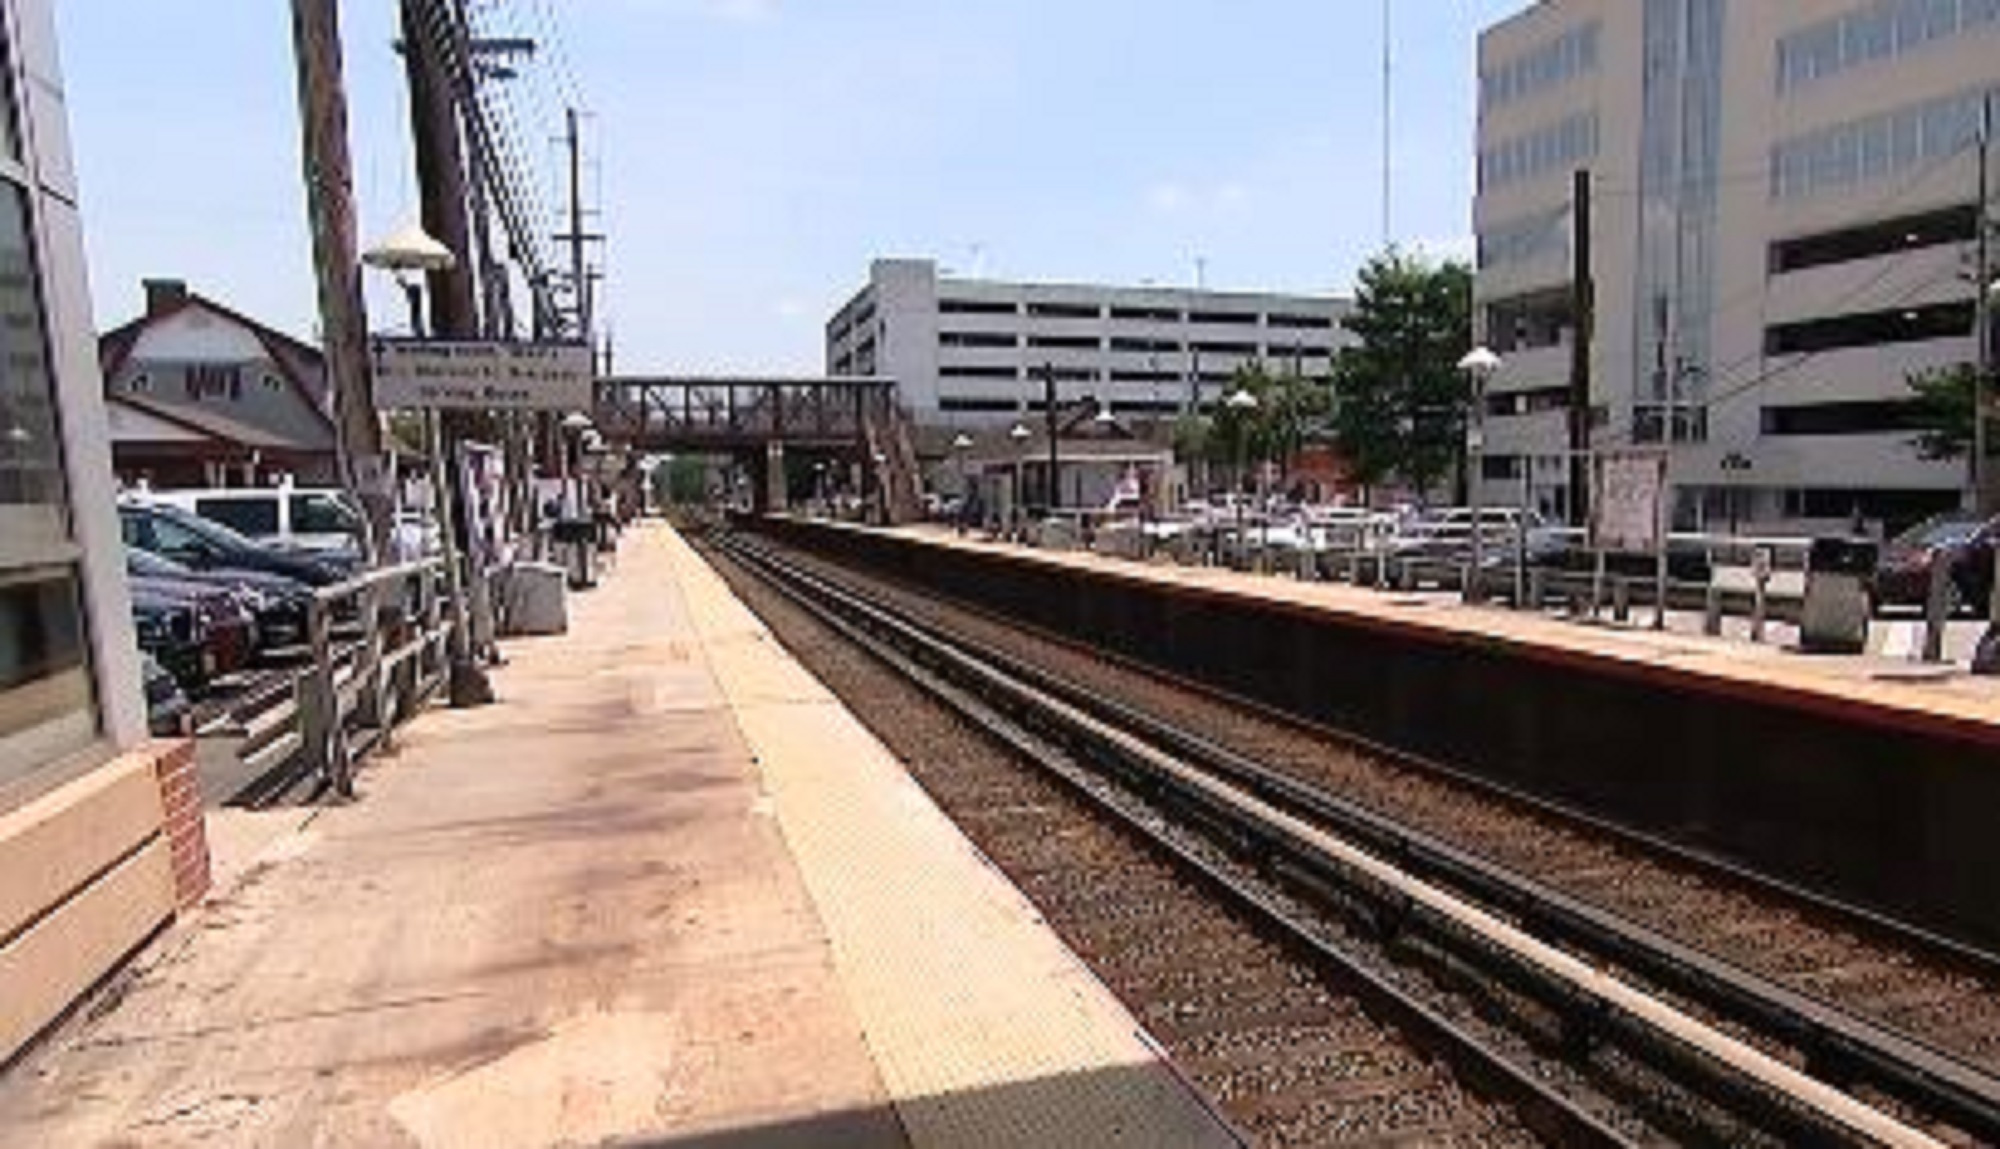 Some LIRR commuters angry over proposed schedule changes to Port